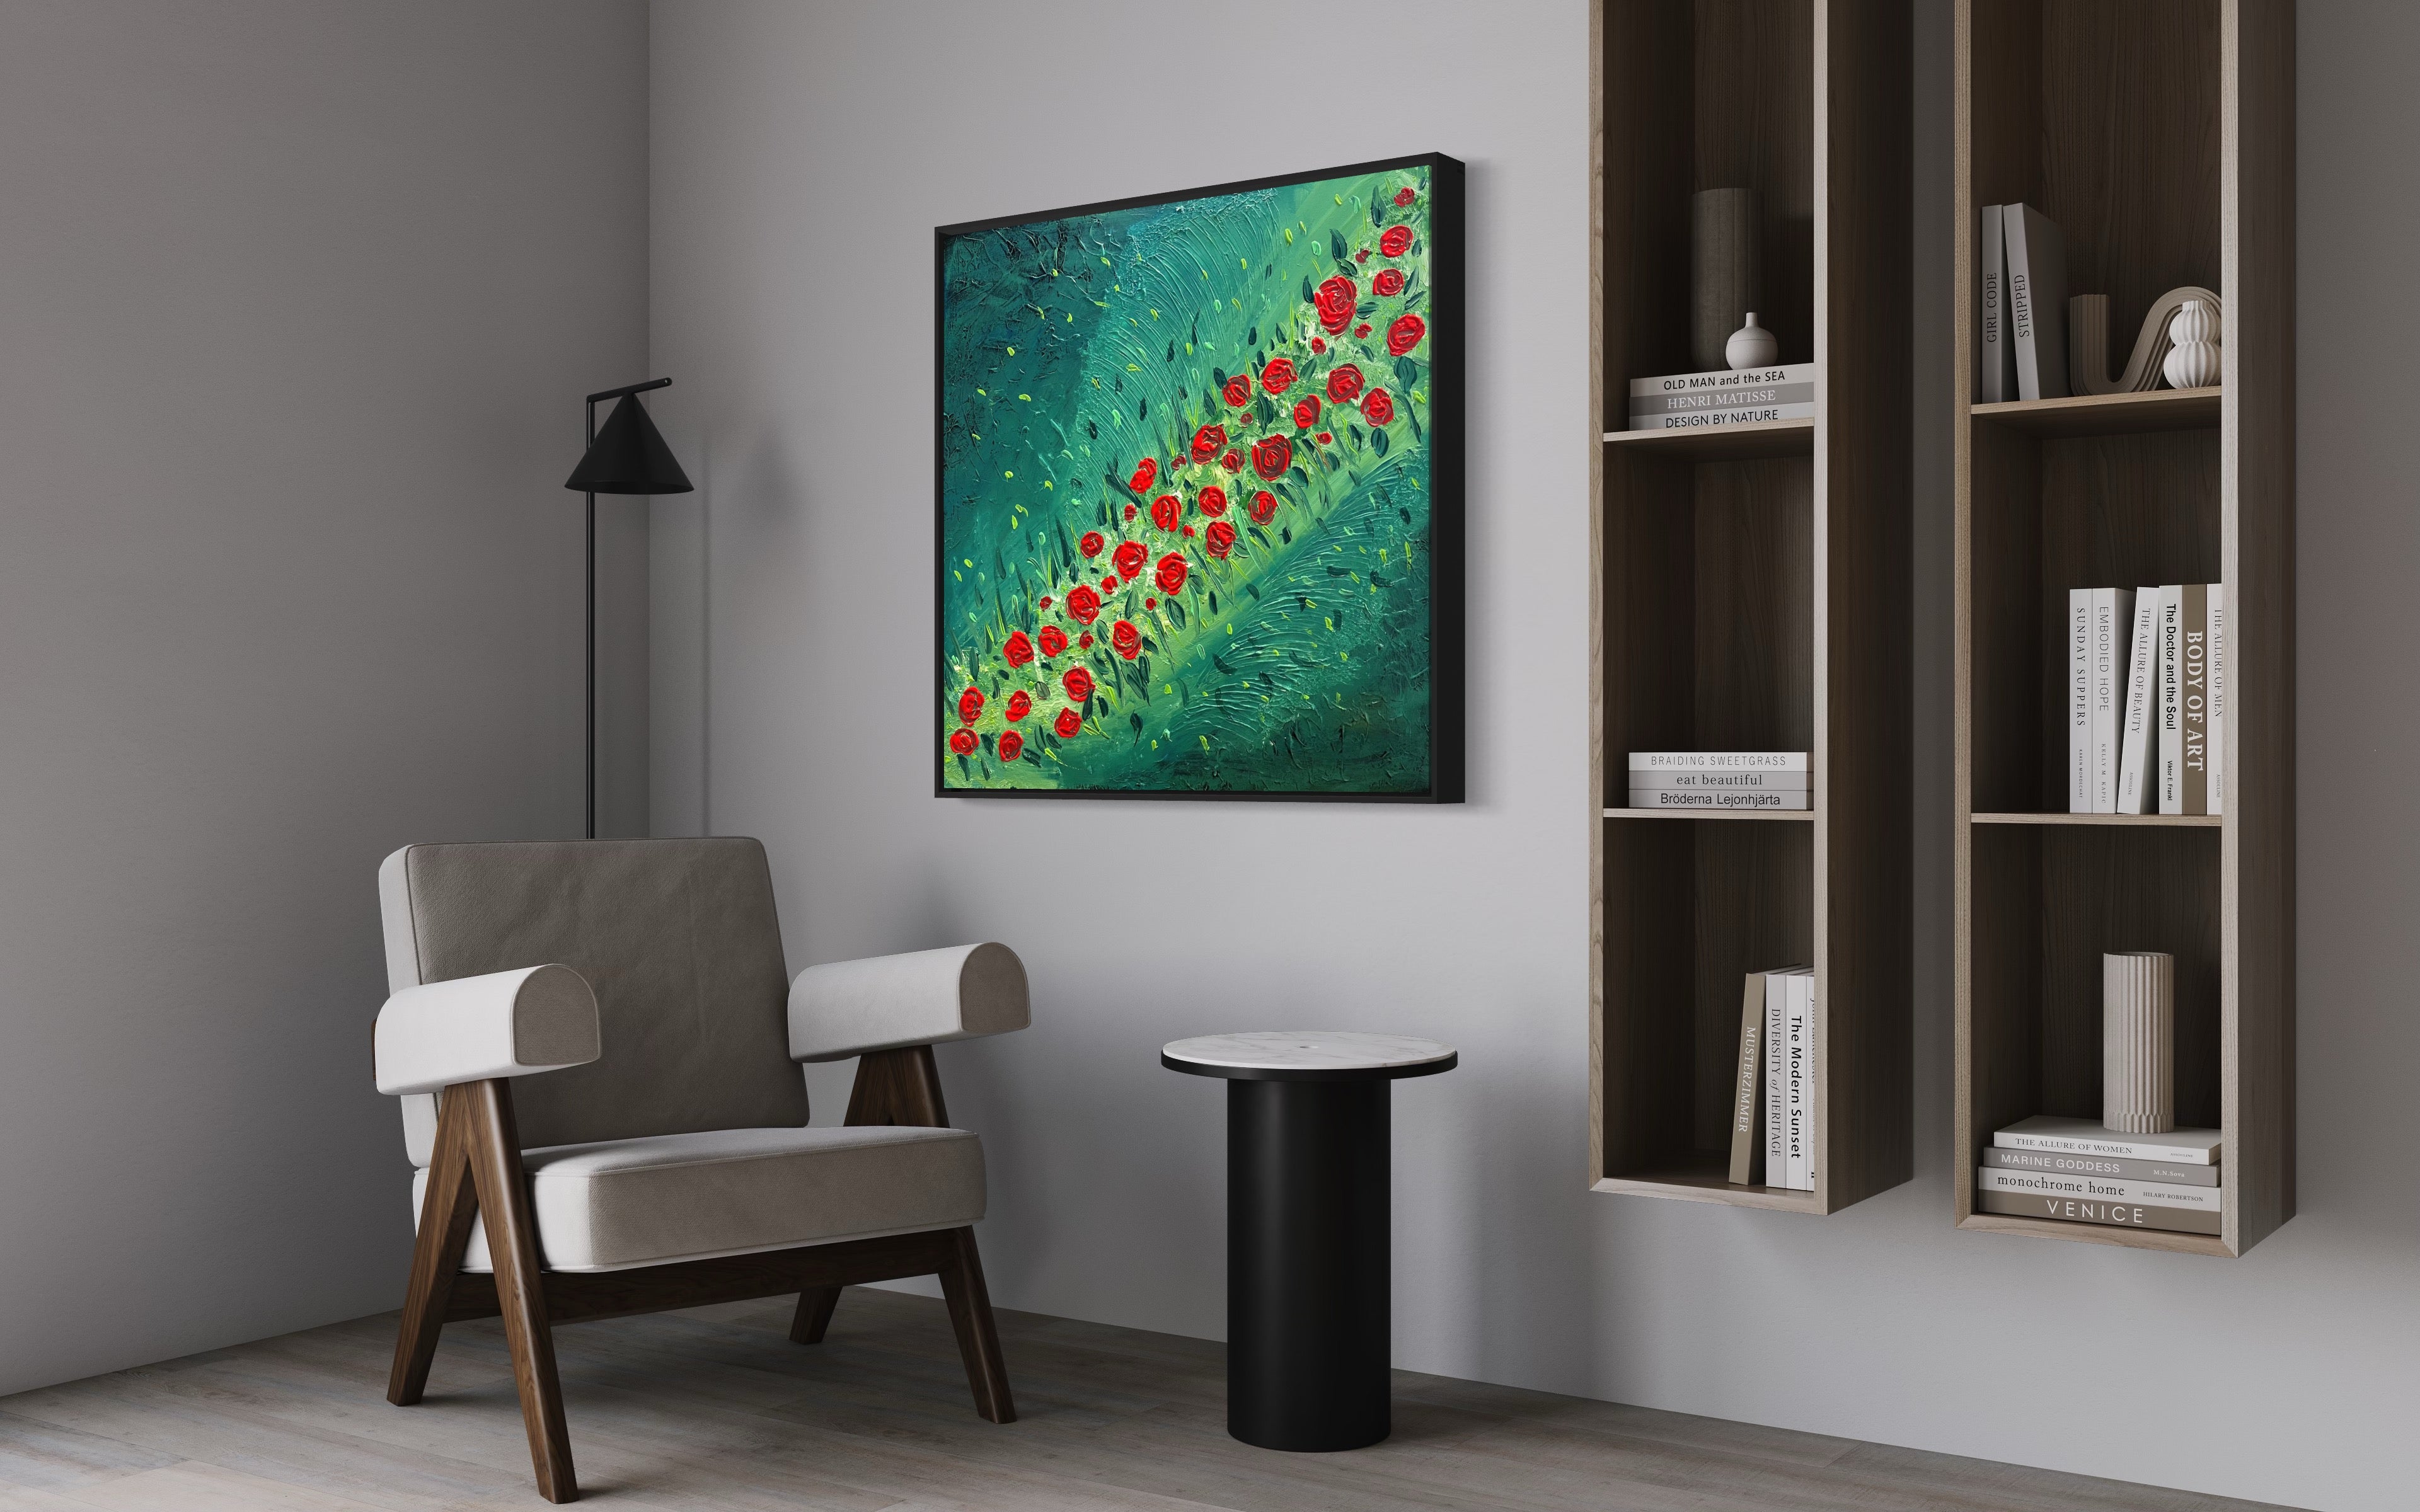 Red Rose Field 91 cm x 91 cm Red Green Textured Abstract Painting by Joanne Daniel